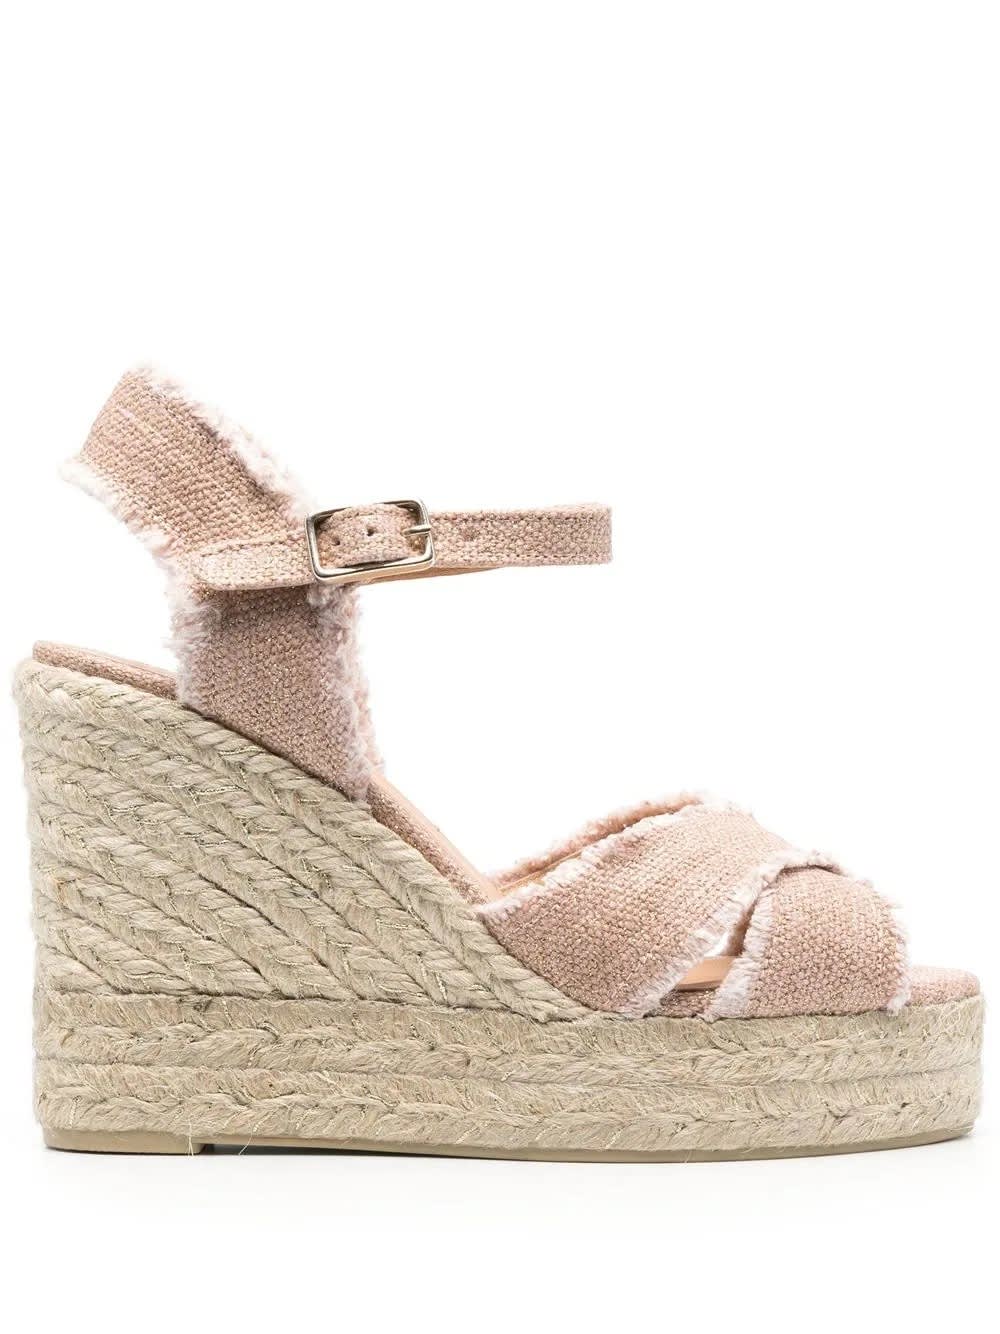 Castañer Bromelia Wedge Espadrille In Pink Linen With Gold Glitter